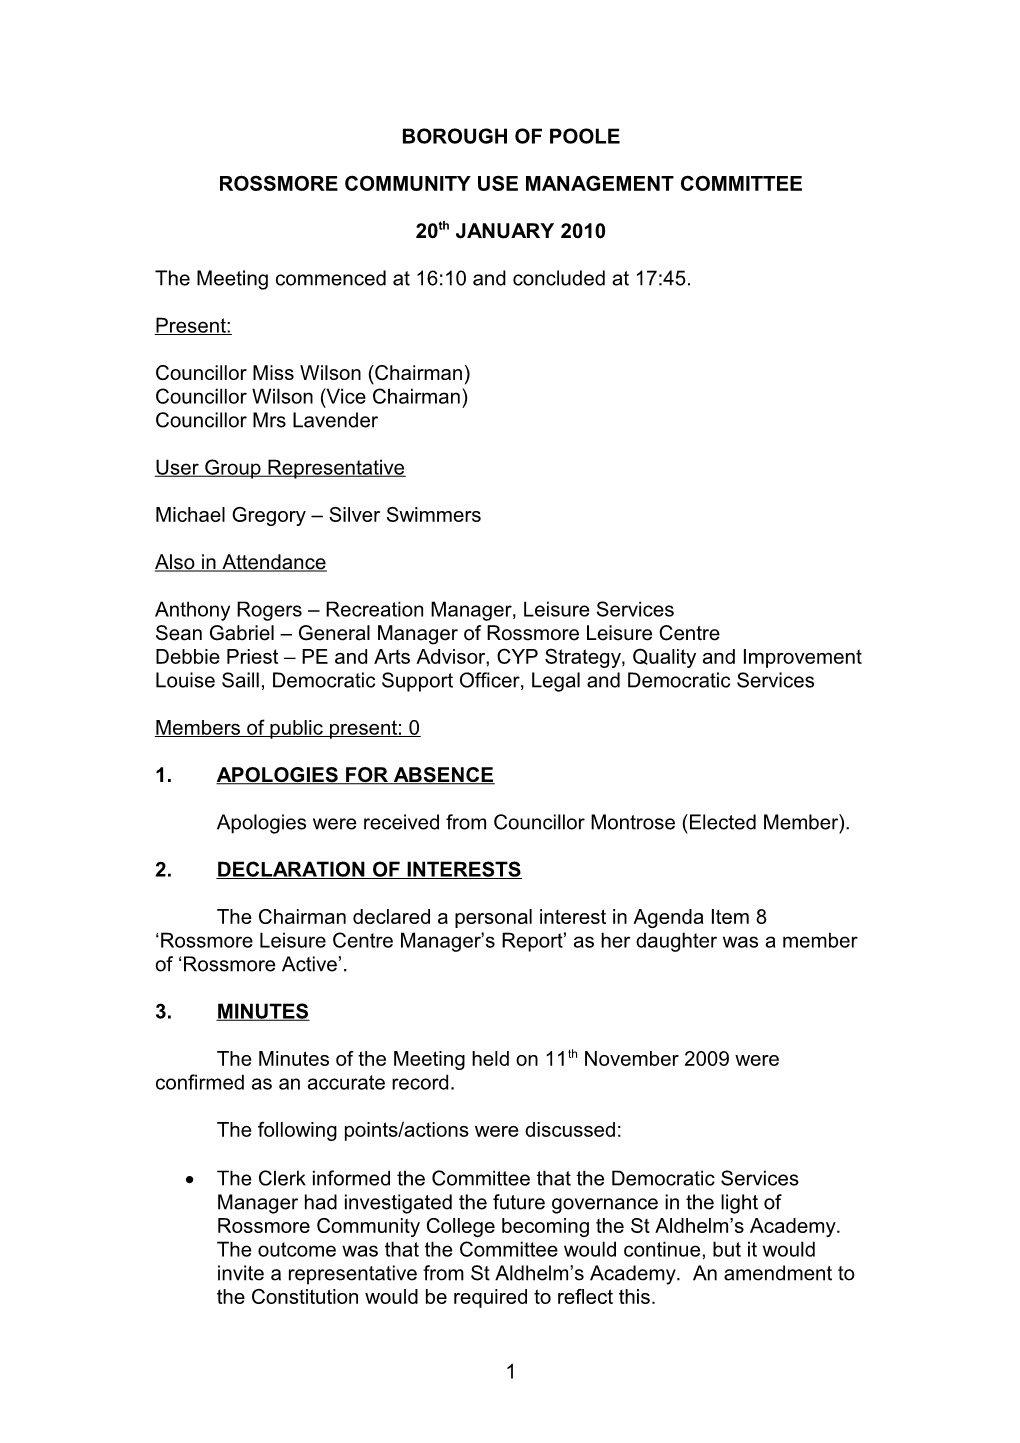 Minutes - Rossmore Community Use Management Committee - 20 January 2010